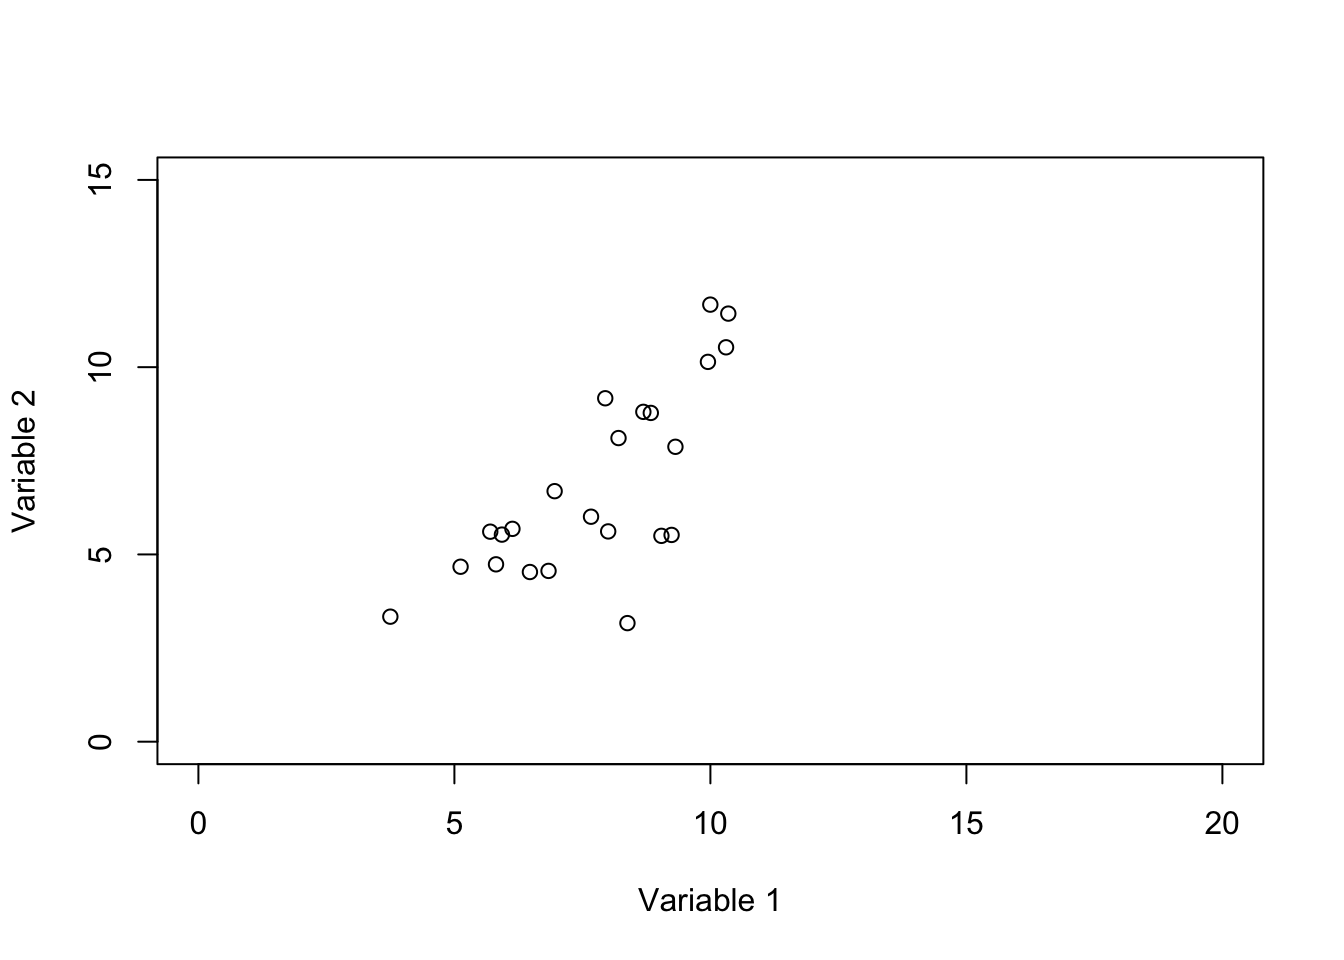 Plot of two genes showing the space defined by these two variables